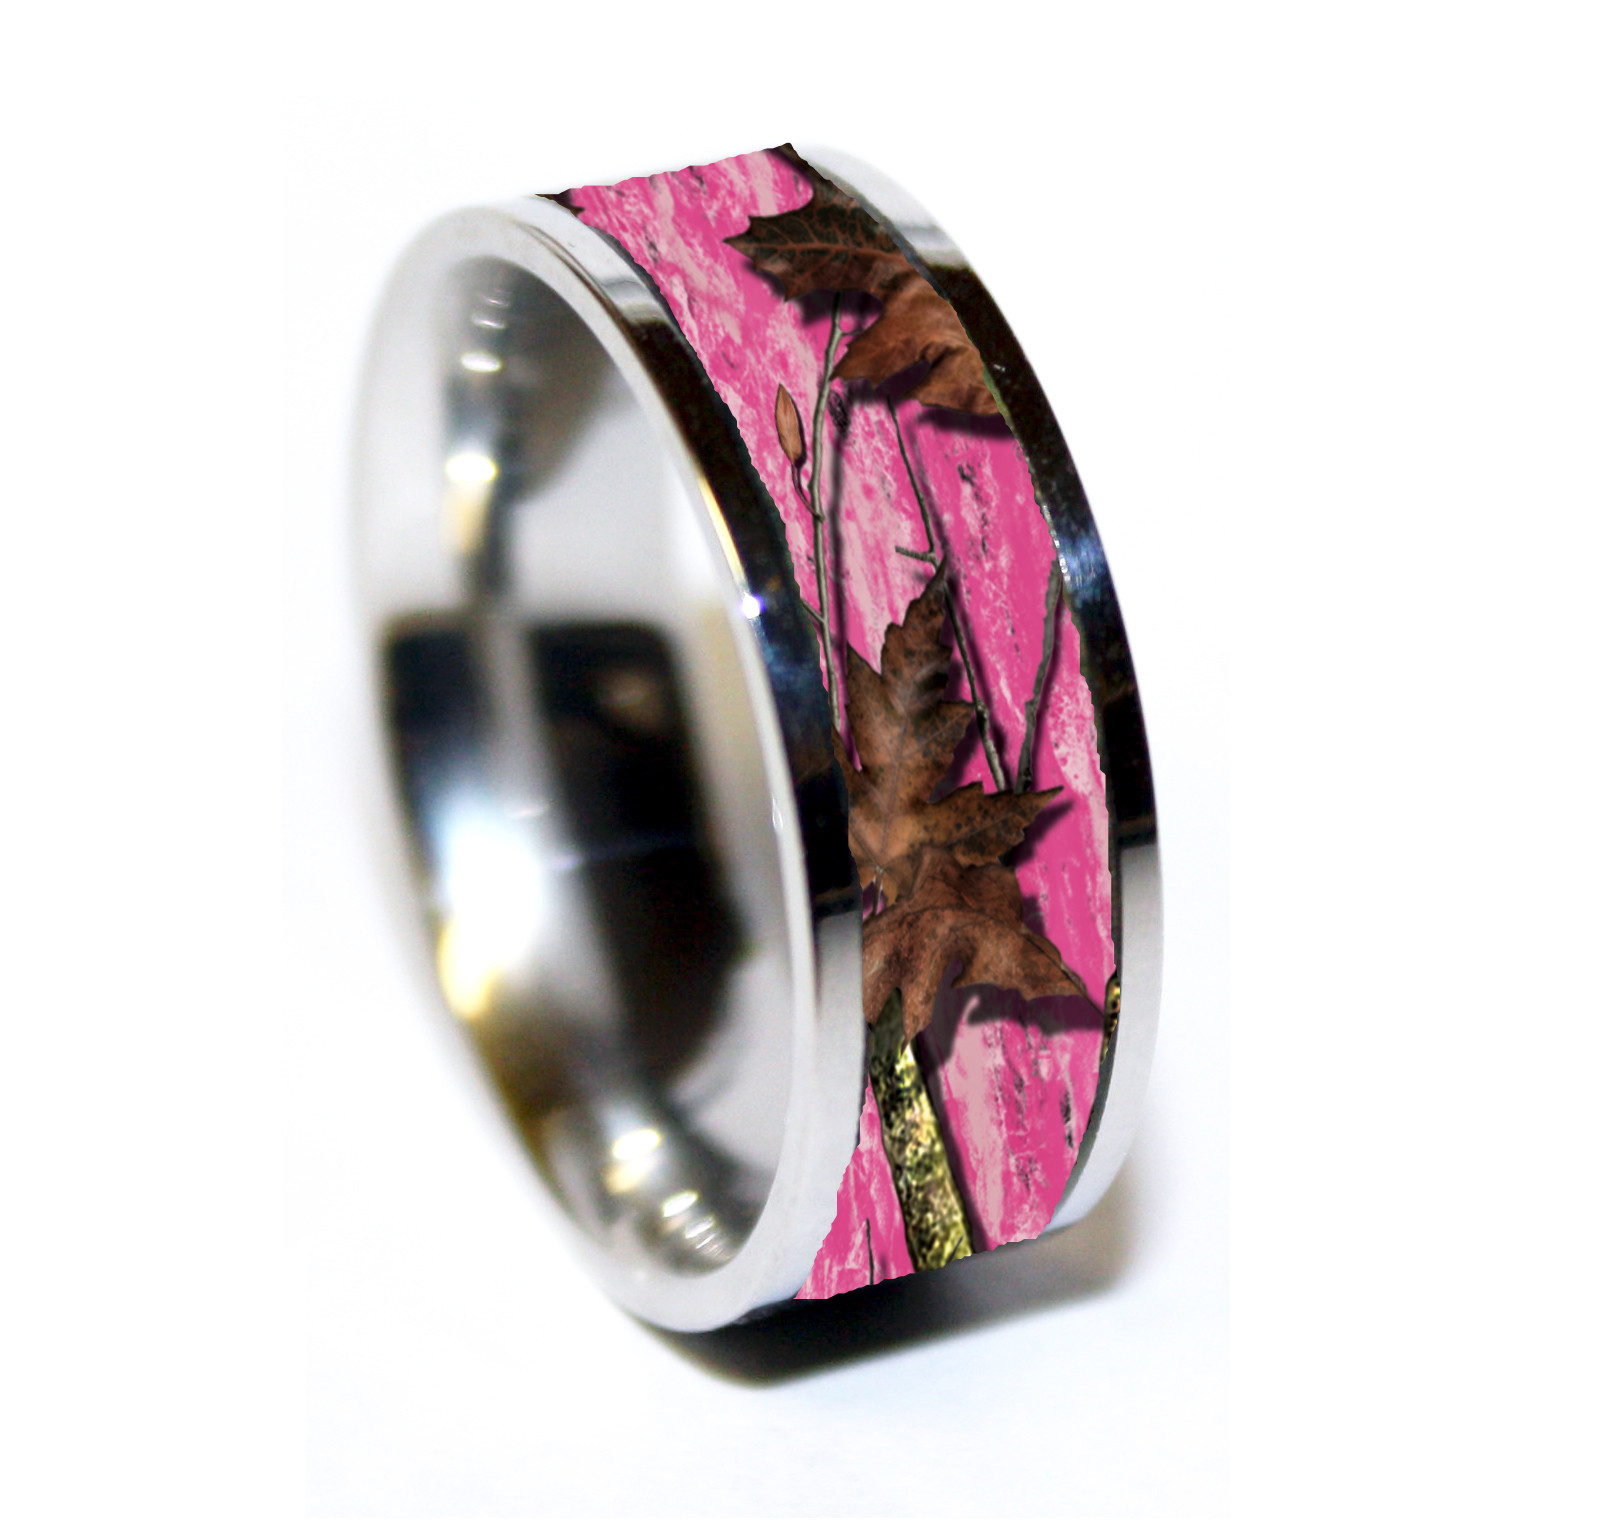 Pink Camo Wedding Rings For Her
 PINK CAMO Camouflage Wedding Rings & Camo Rings